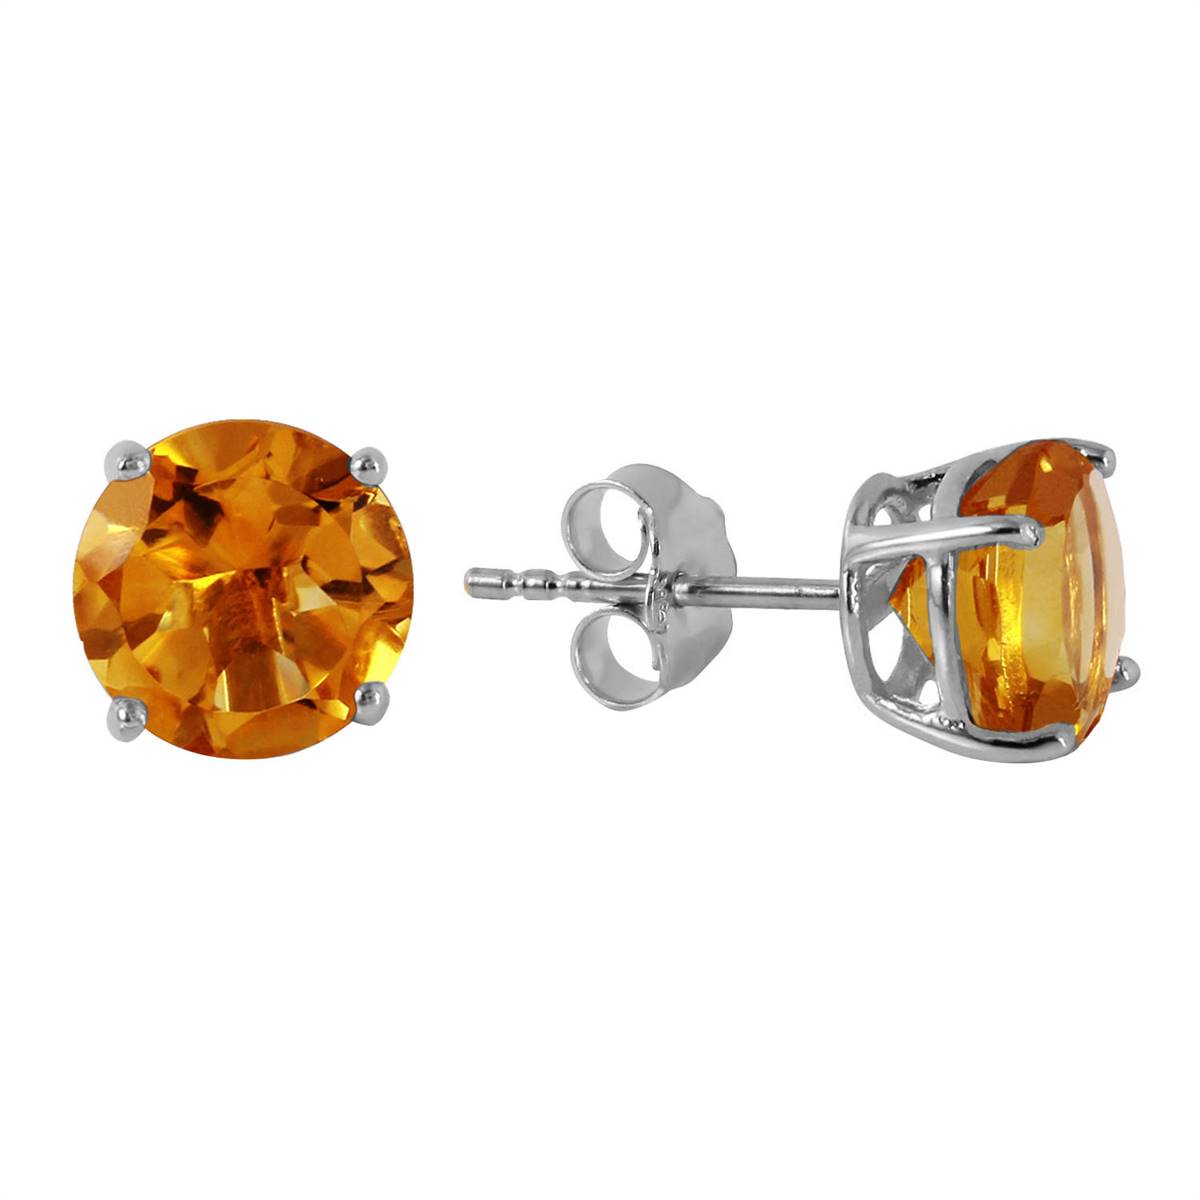 3.1 Carat 14K Solid White Gold Vous Le Charme Citrine Earrings